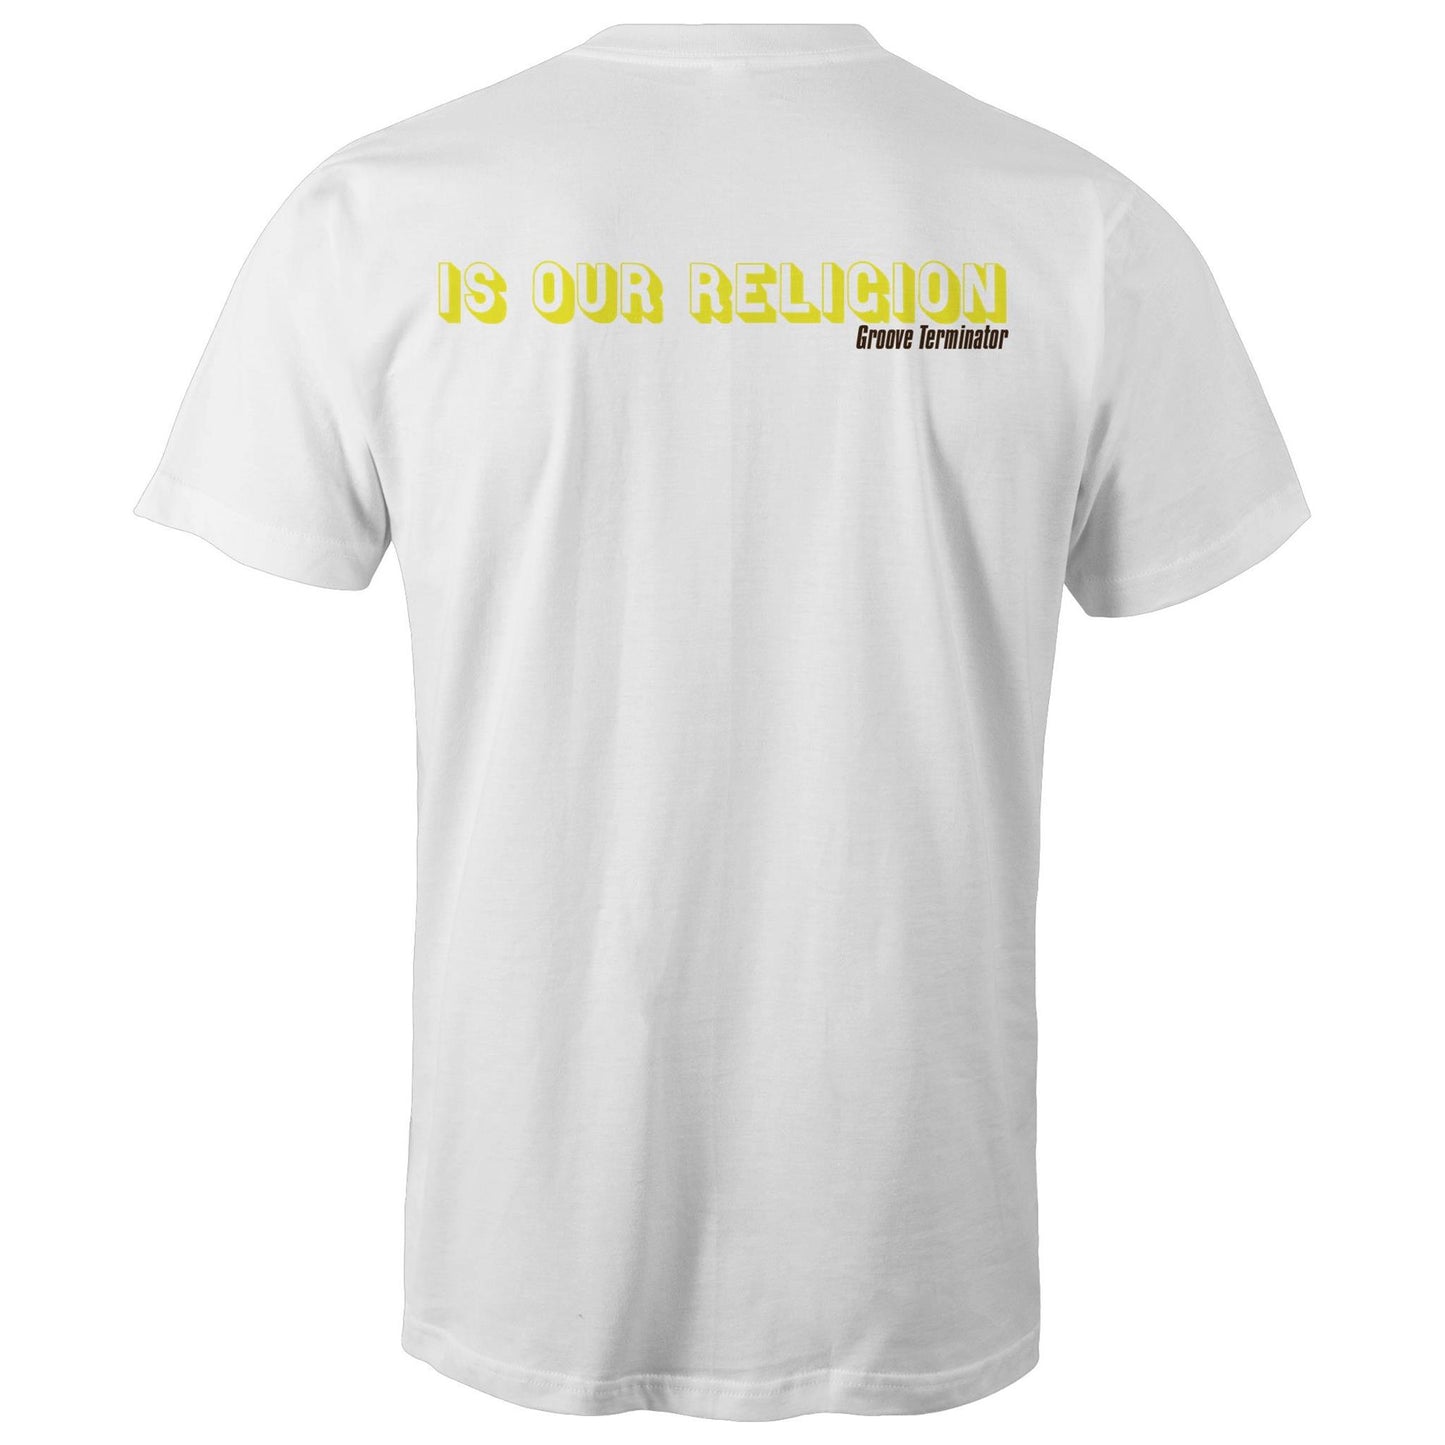 House is Our Religion front & back Mens Tee white